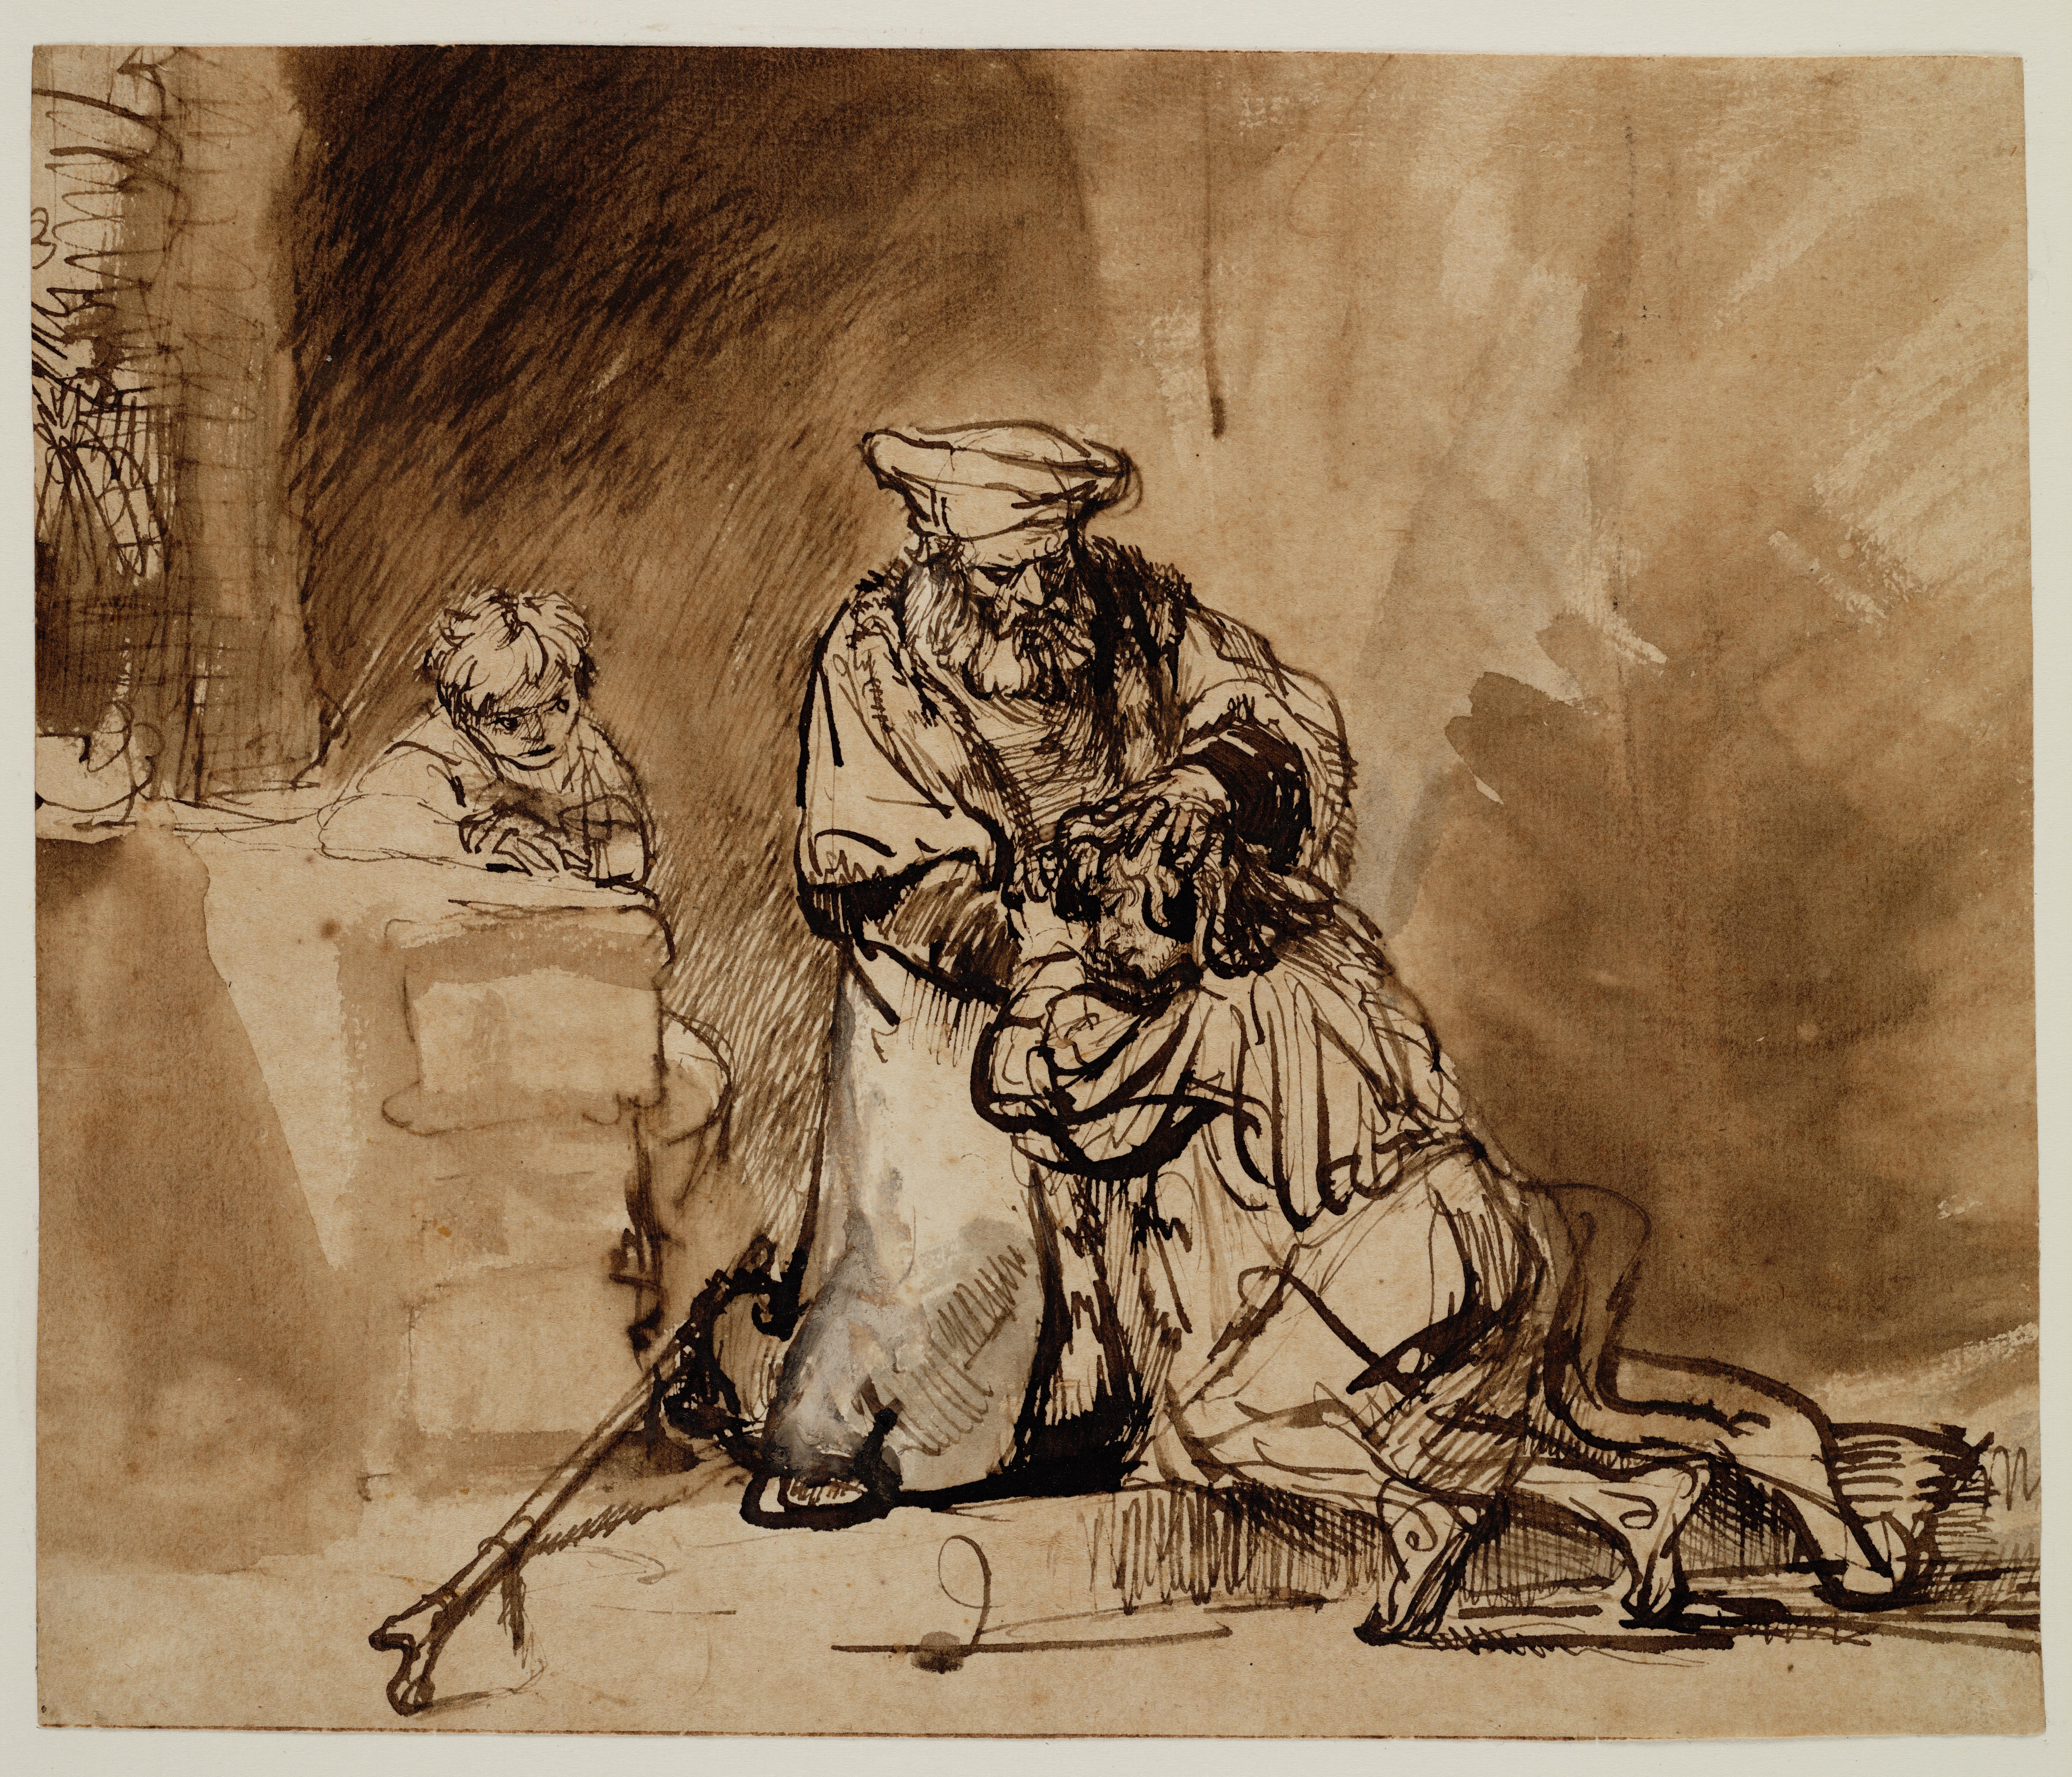 FileProdigal son by Rembrandt (drawing, 1642).jpg Wikimedia Commons